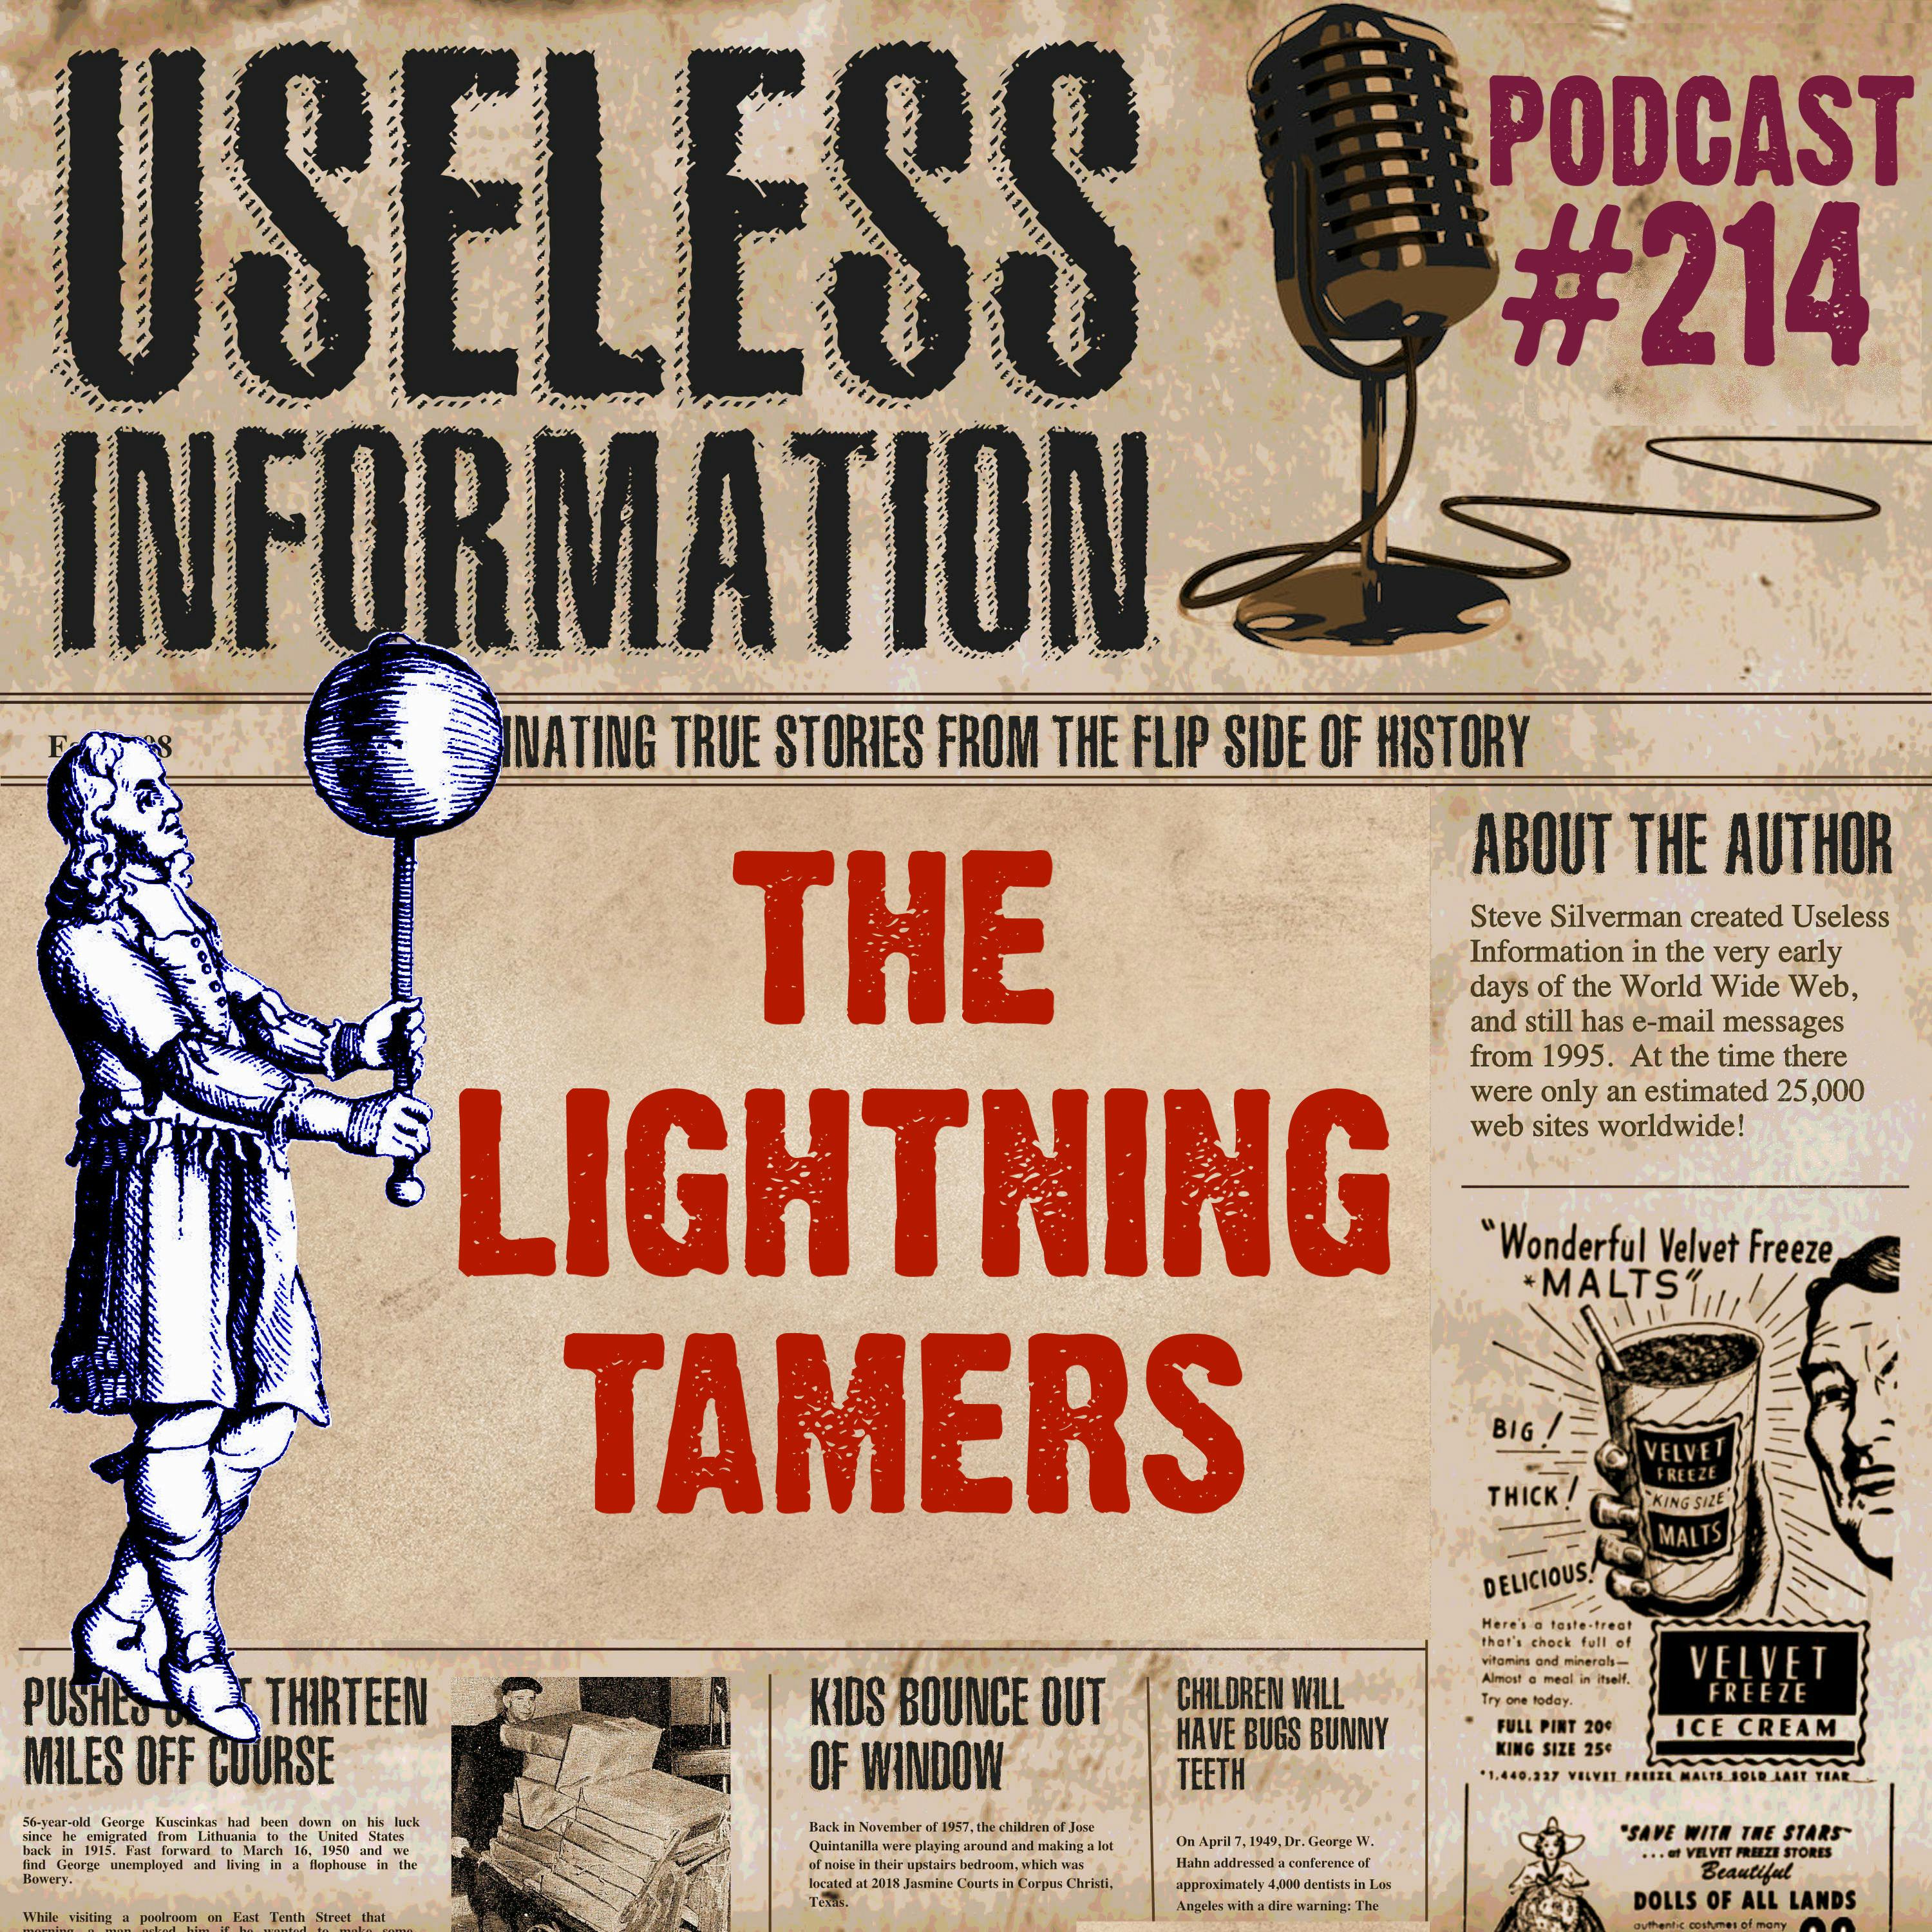 The Lightning Tamers - UI Podcast #214